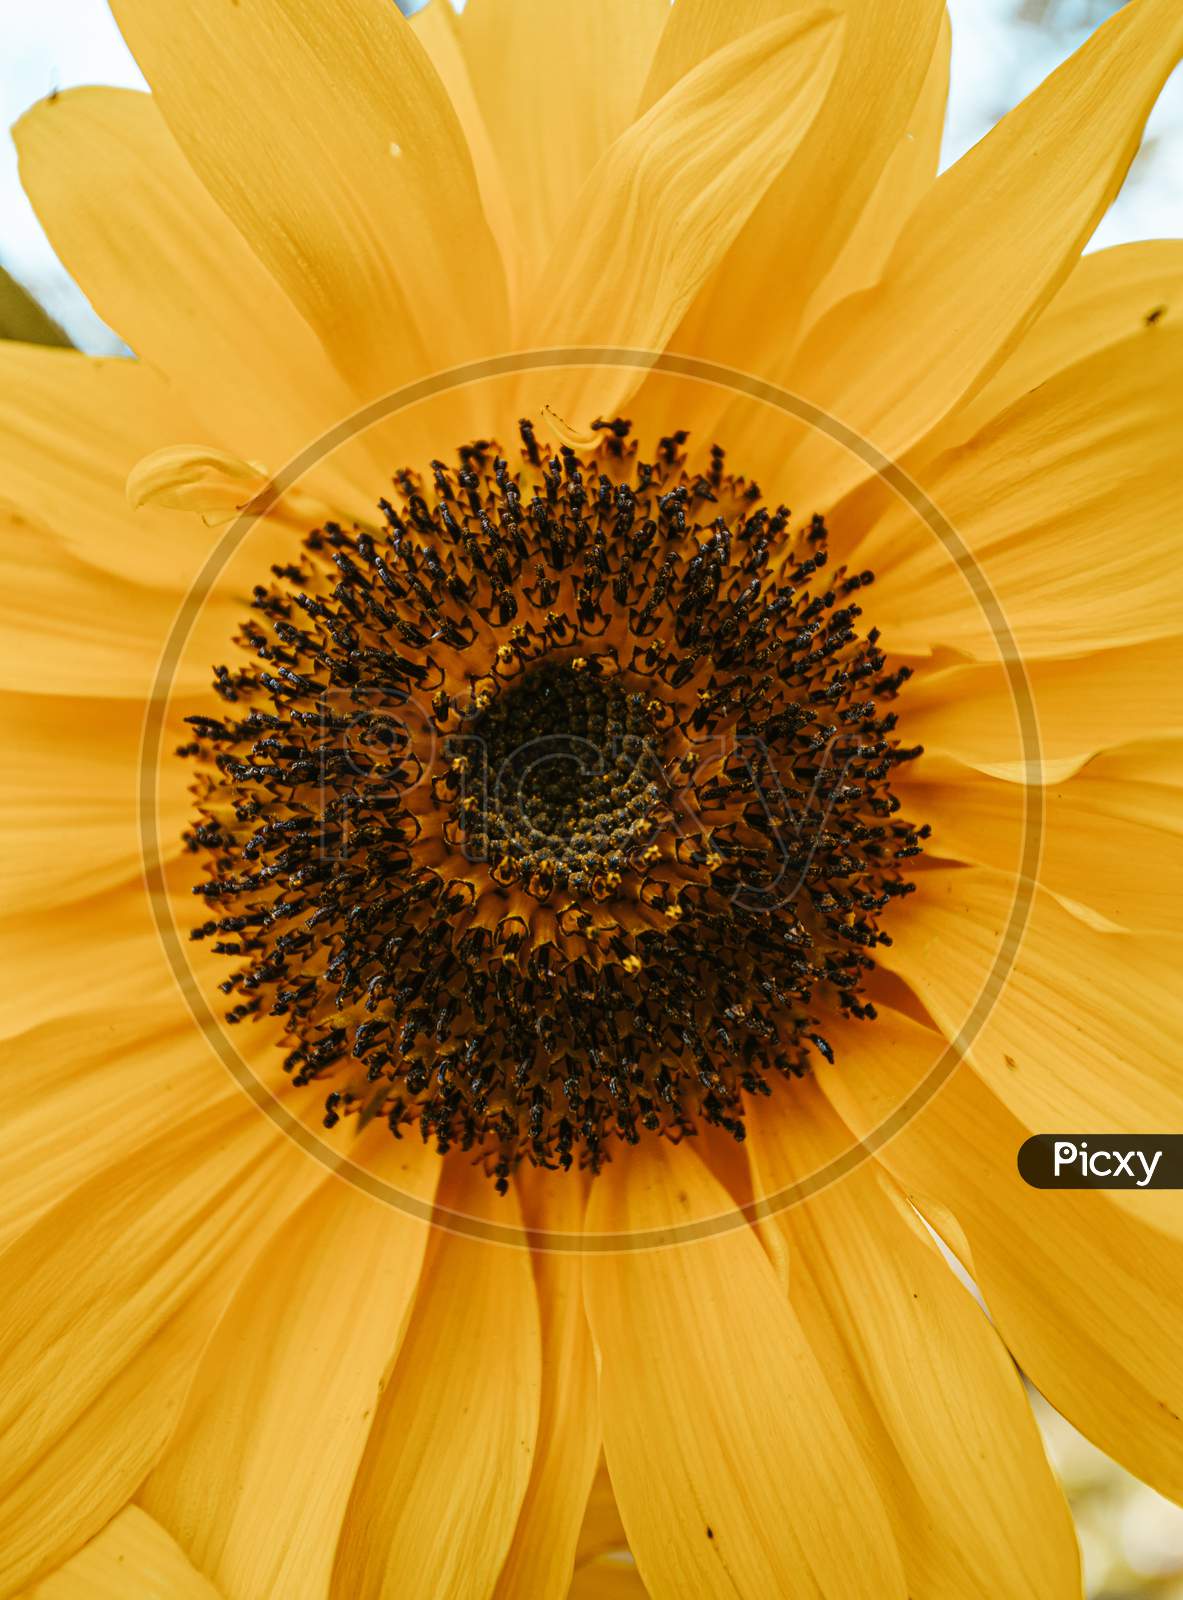 A Close Up Of A Sunflower During Summer